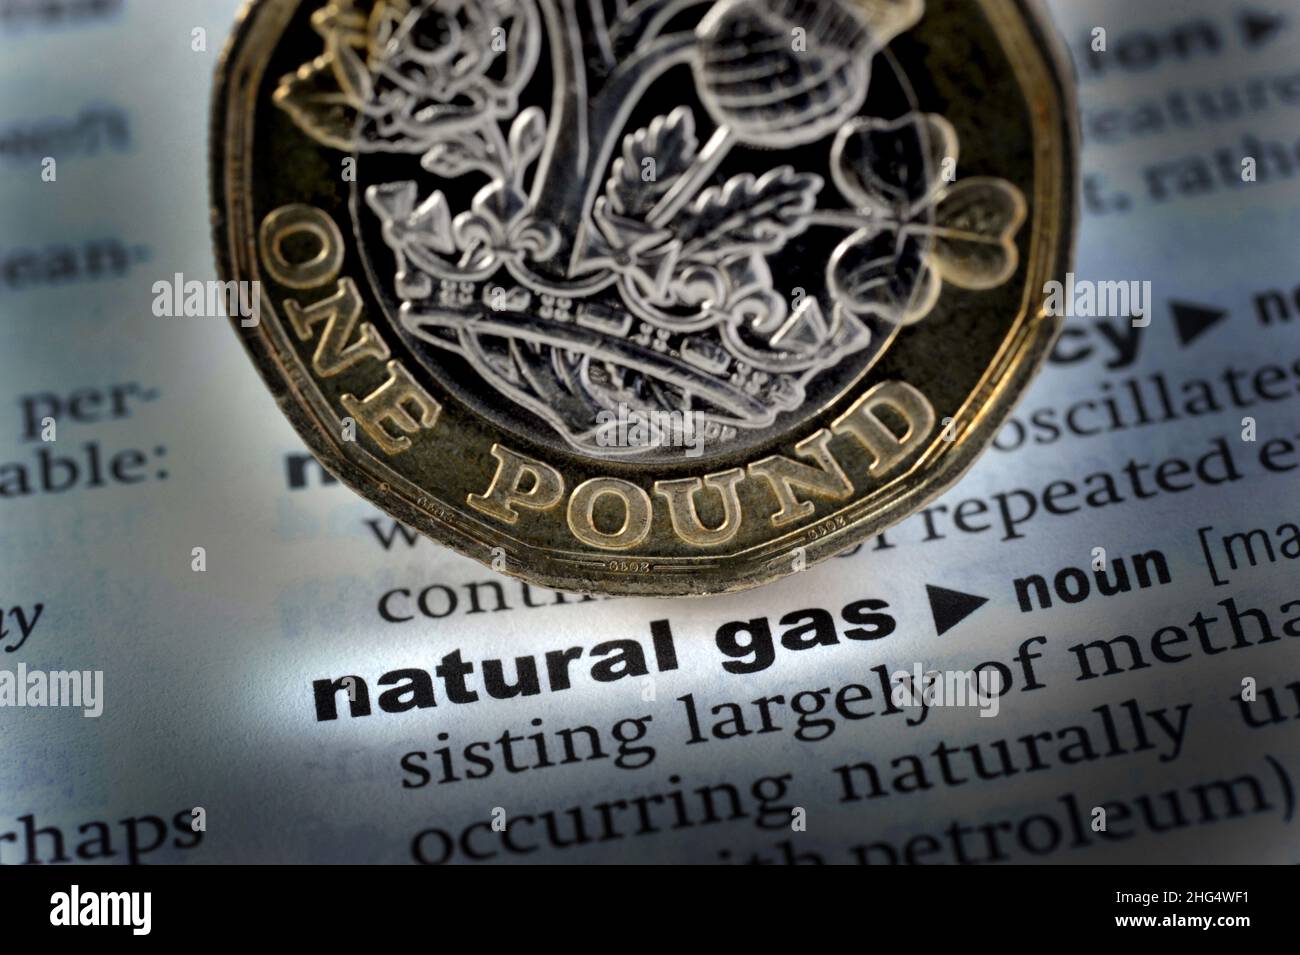 DICTIONARY DEFINITION OF OF WORDS NATURAL GAS WITH ONE POUND COIN RE ENERGY PRICES HEATING COST OF LIVING FOSSIL FUELS ETC UK Stock Photo